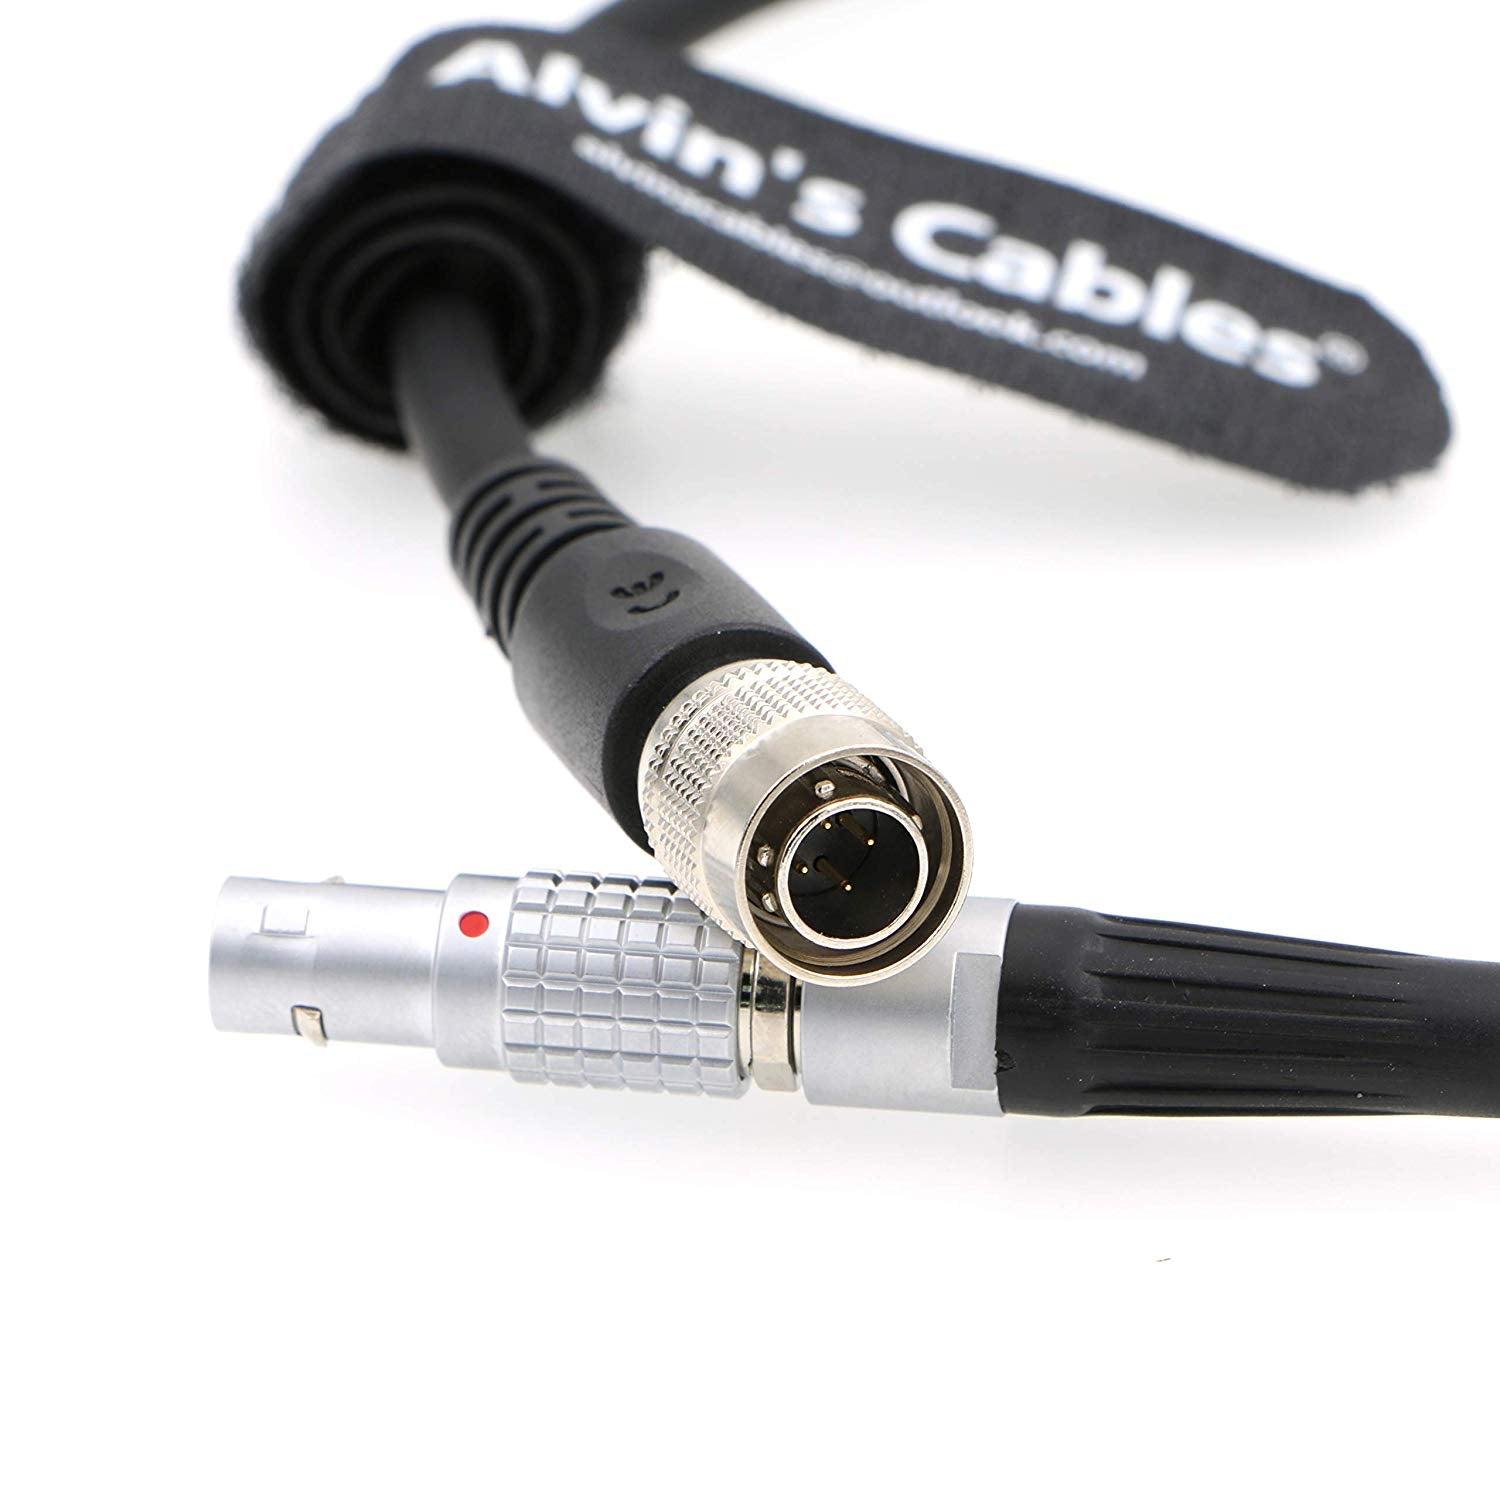 Alvin's Cables 2 Pin Male to Hirose 4 Pin Male Cable Power Teradek Bolt from Steadicam